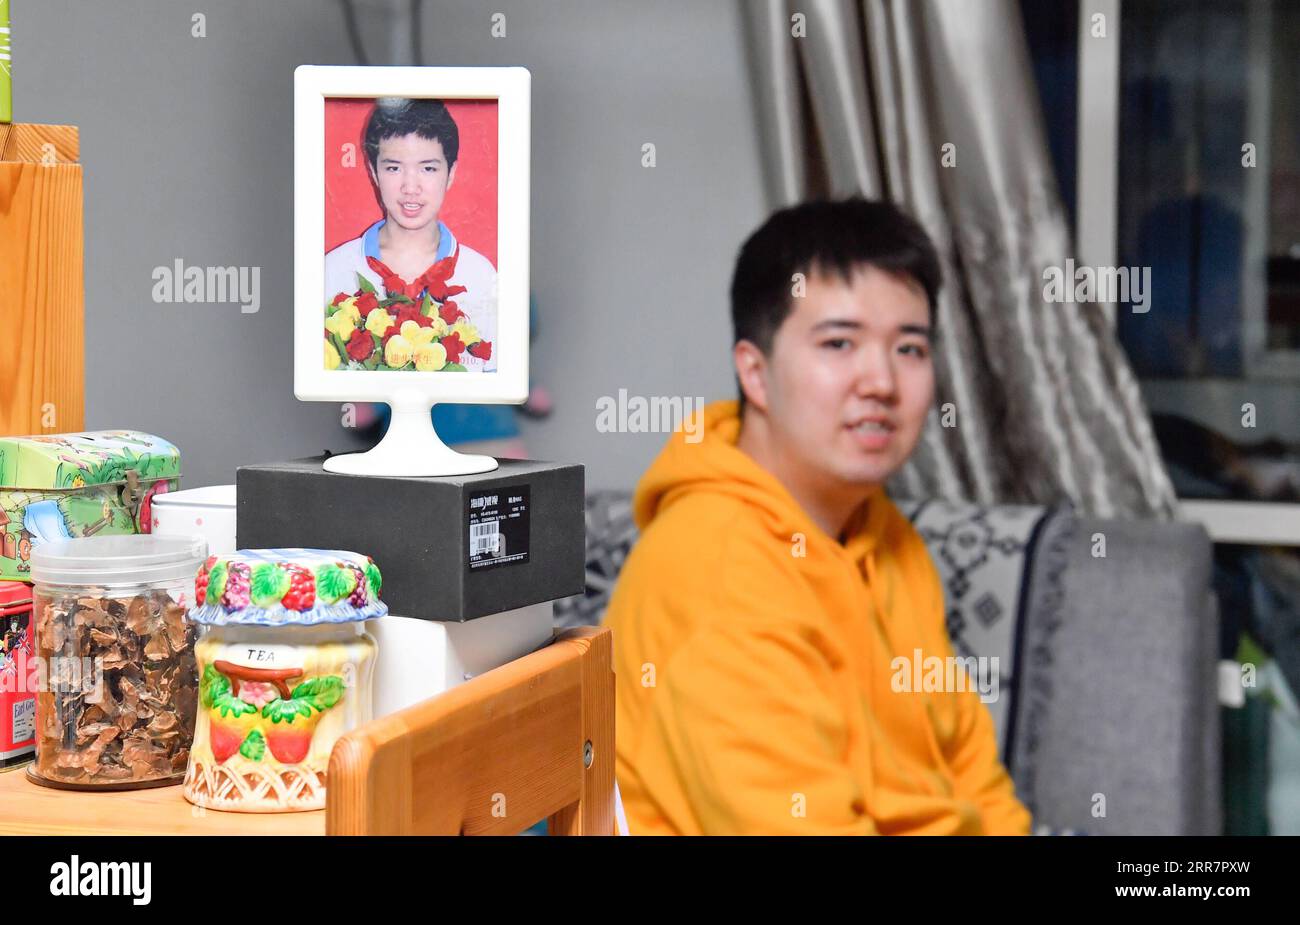 210402 -- TIANJIN, April 2, 2021 -- Photo shows Zhang Hao posing with a portrait of him when he graduated from a school for people with autism in Hebei District, north China s Tianjin, March 29, 2021. In 1998, Zhang Hao was diagnosed with autism at the age of two. Ever since the diagnosis, Zhang s mother Wu Guixiang has spent all her time looking after her son. In order to help Zhang Hao and eight others with autism improve their social engagement after they had become grown-ups, Wu set up an autism training center in 2016, providing them with courses on life, social and vocational skills. Wit Stock Photo